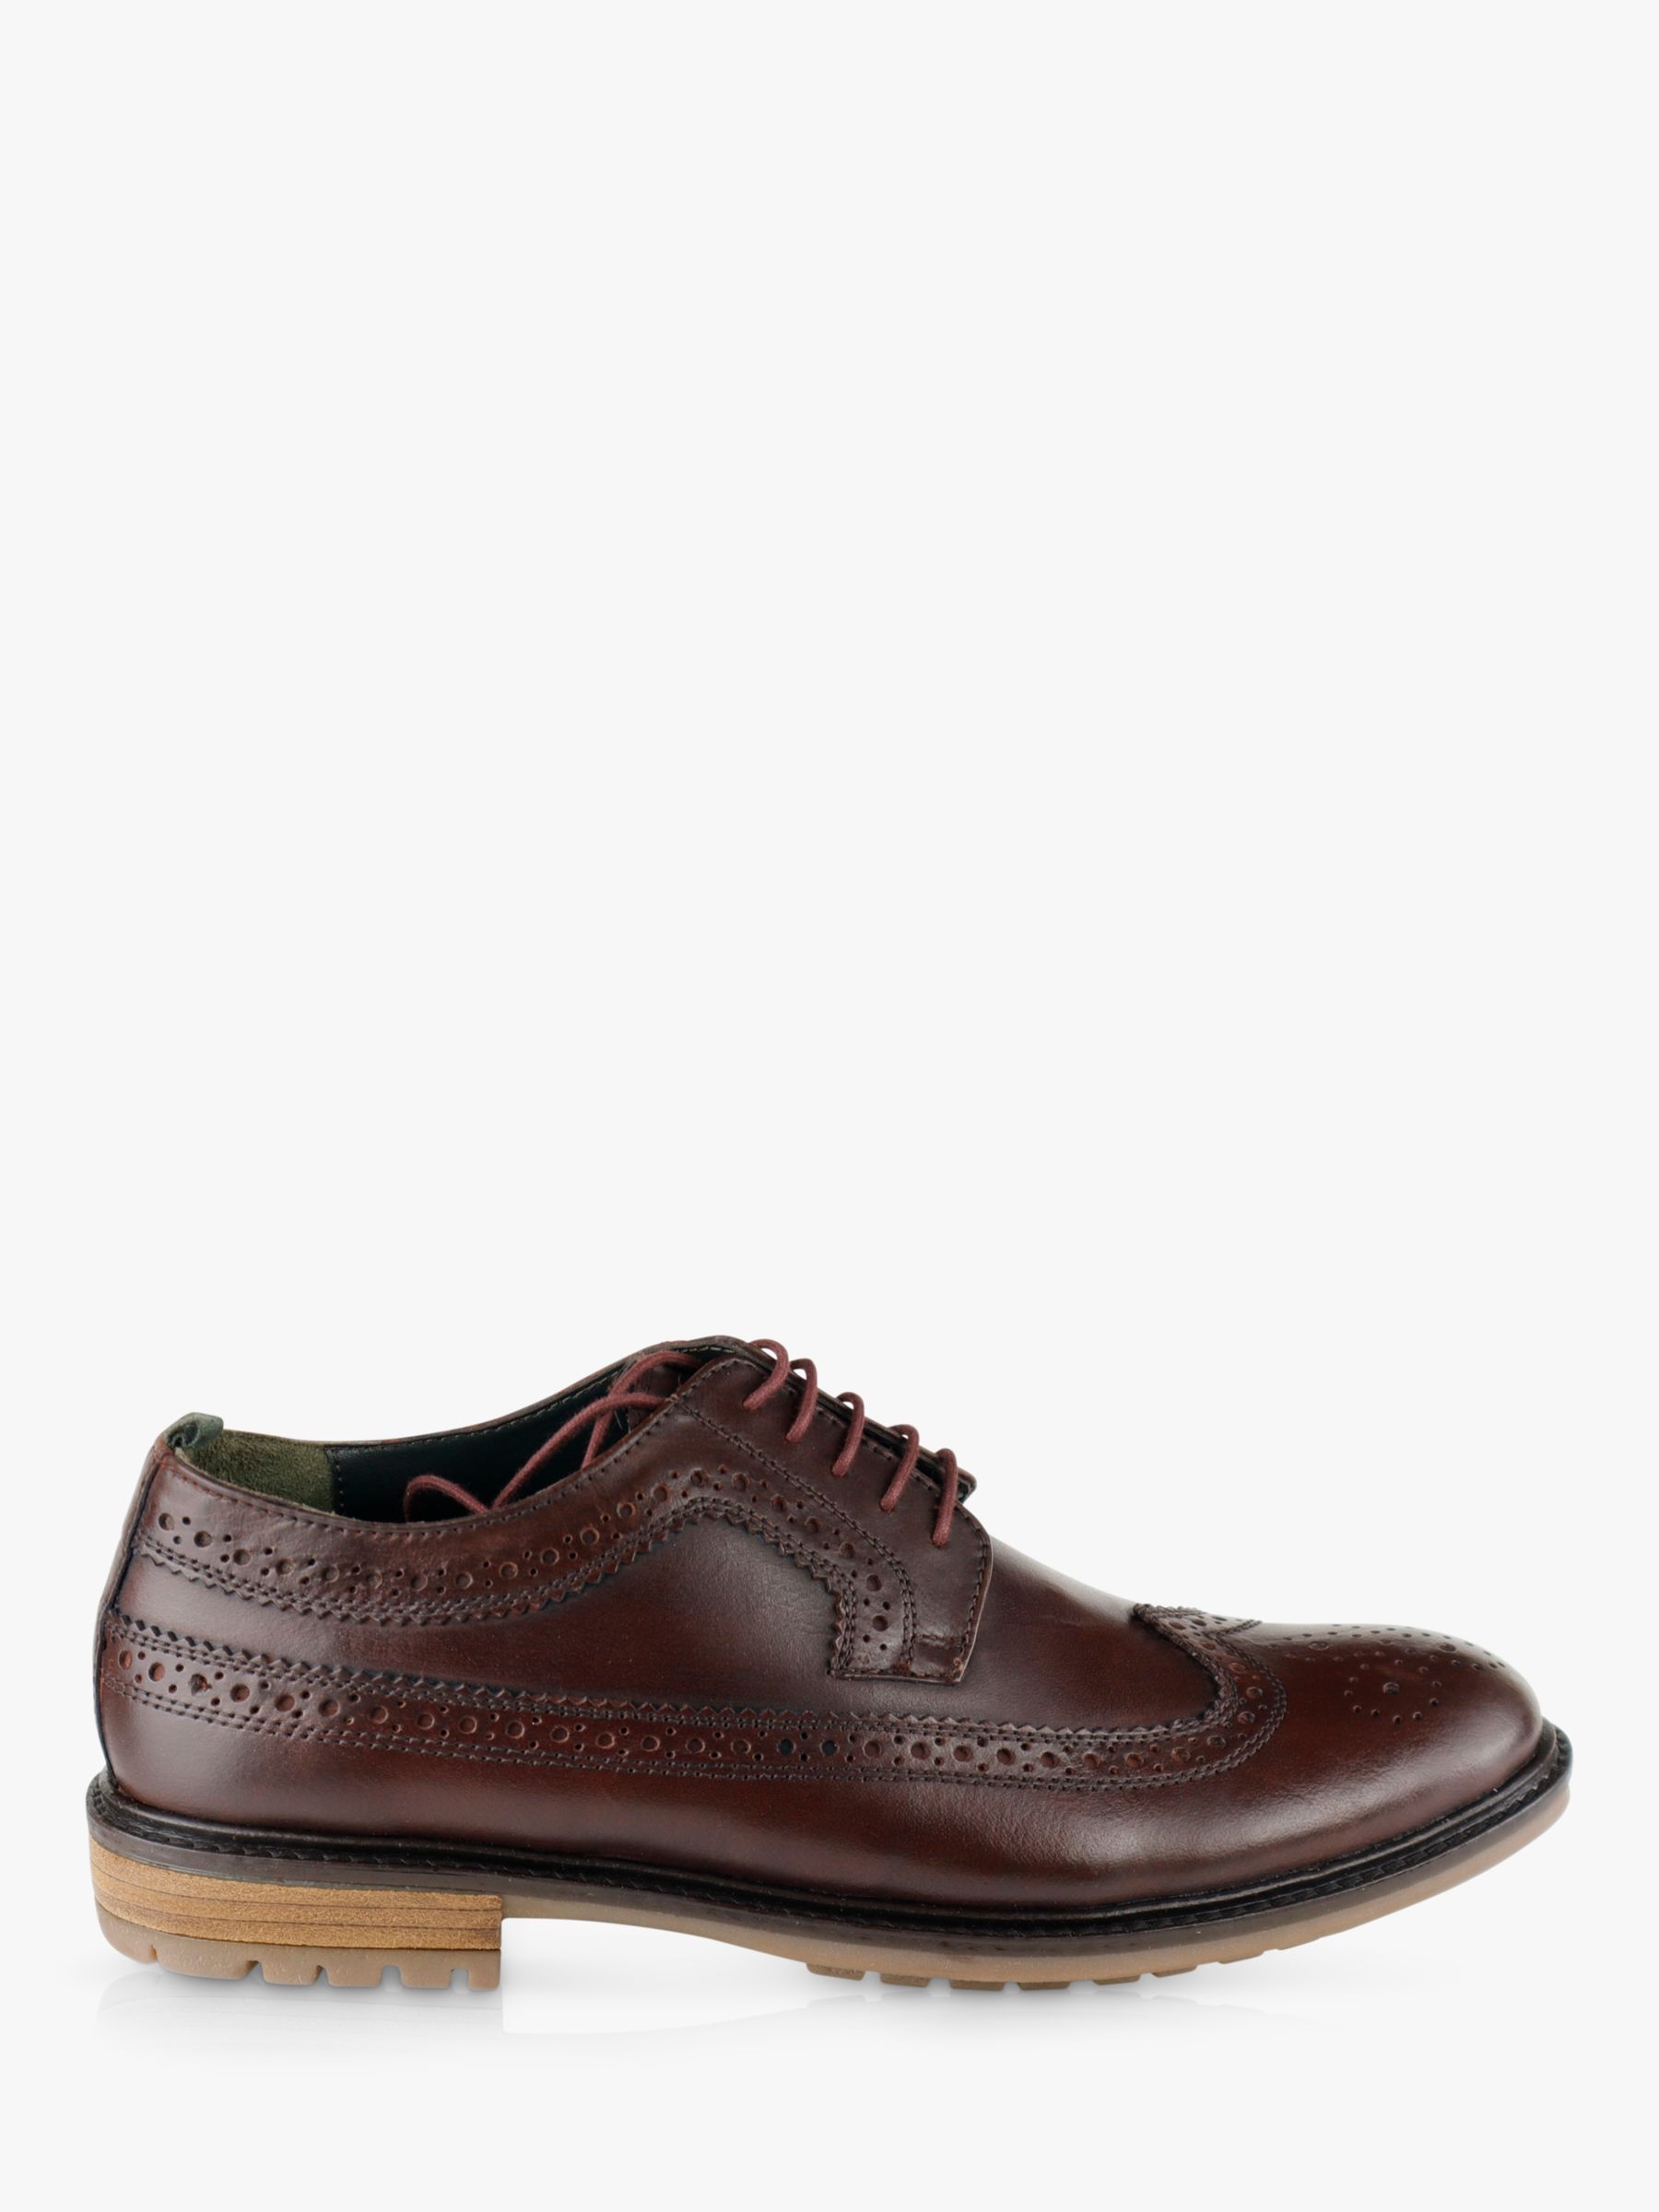 Silver Street London Fenchurch Leather Brogue Shoes, Burgundy at John ...